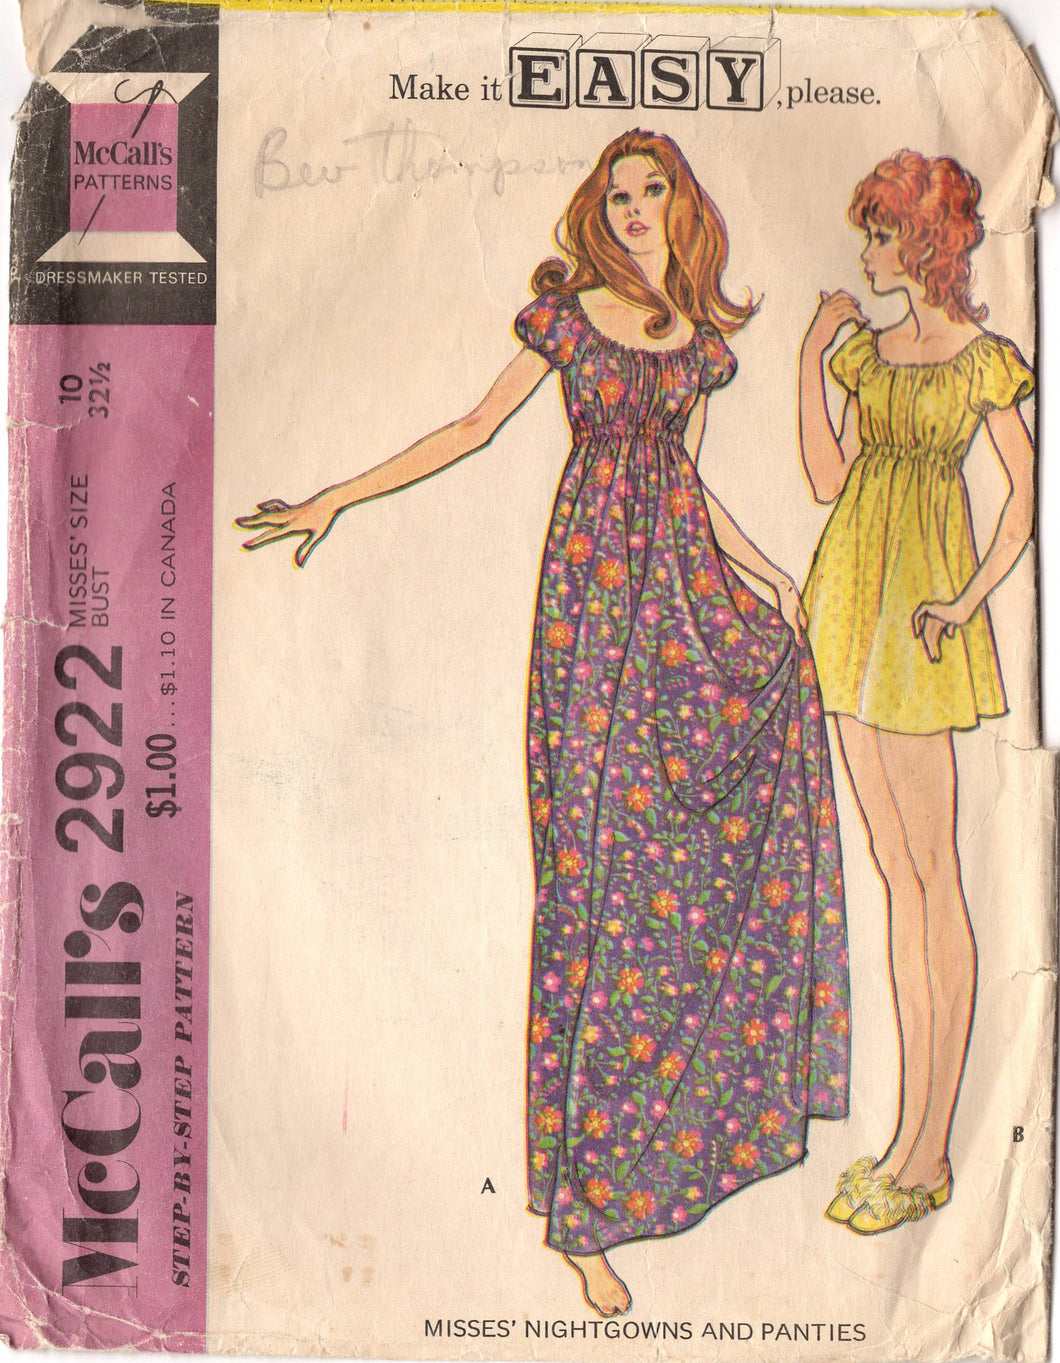 1970's McCall's Long or Short Nightgown and Panties pattern - Bust 32.5